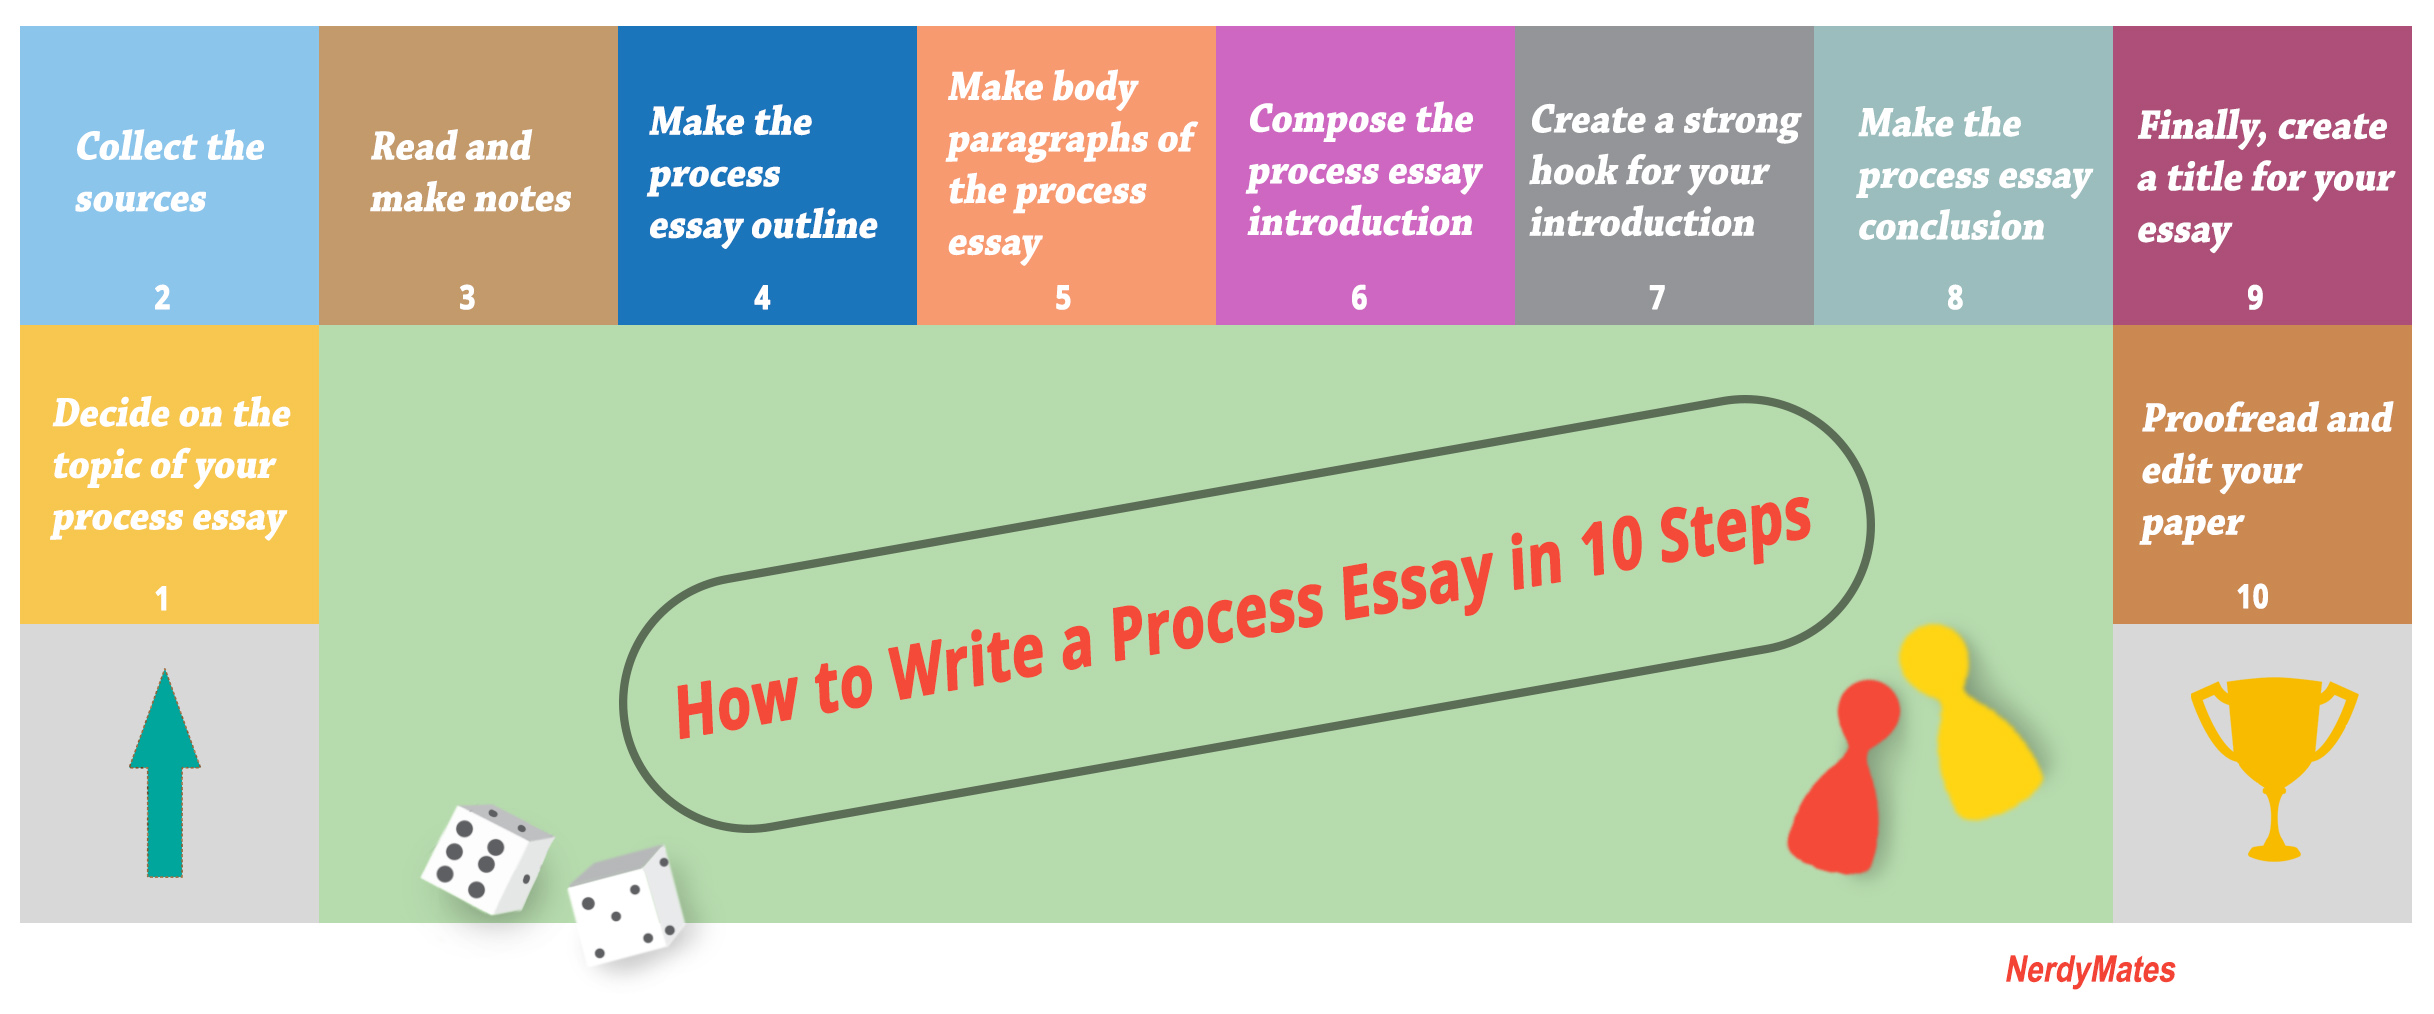 introduction about writing process essay